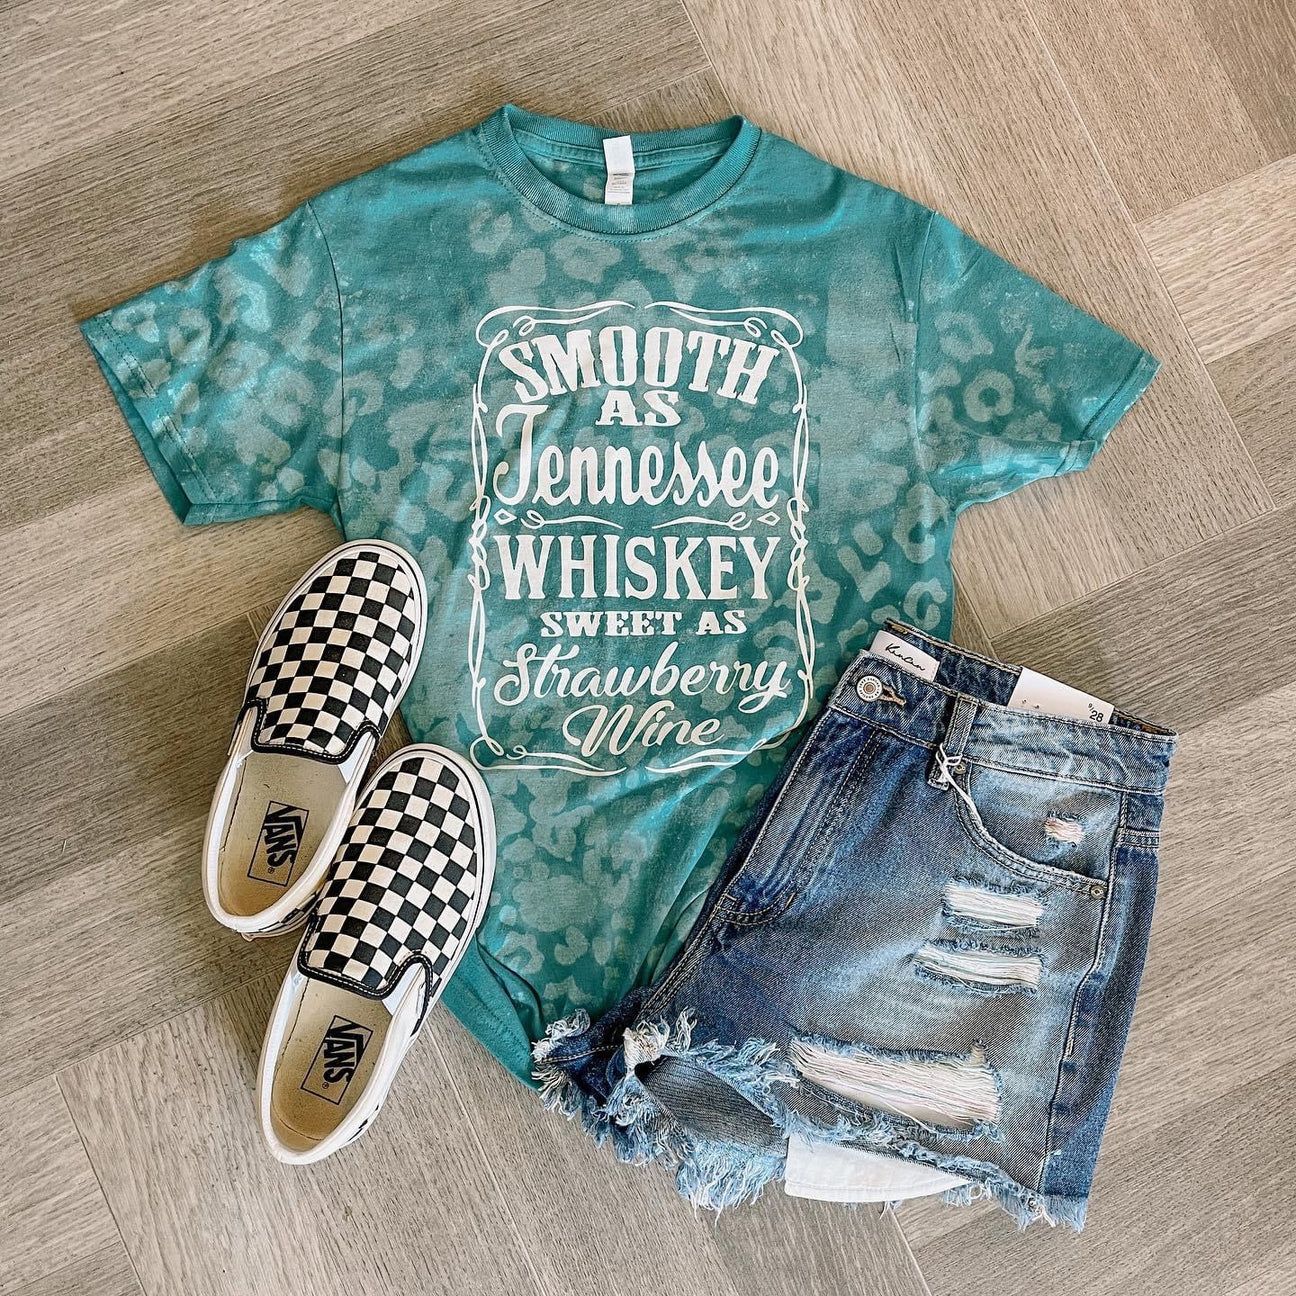 Teal Bleached Tennessee Whiskey Tee - HIGHLAND MOON CO, LLC